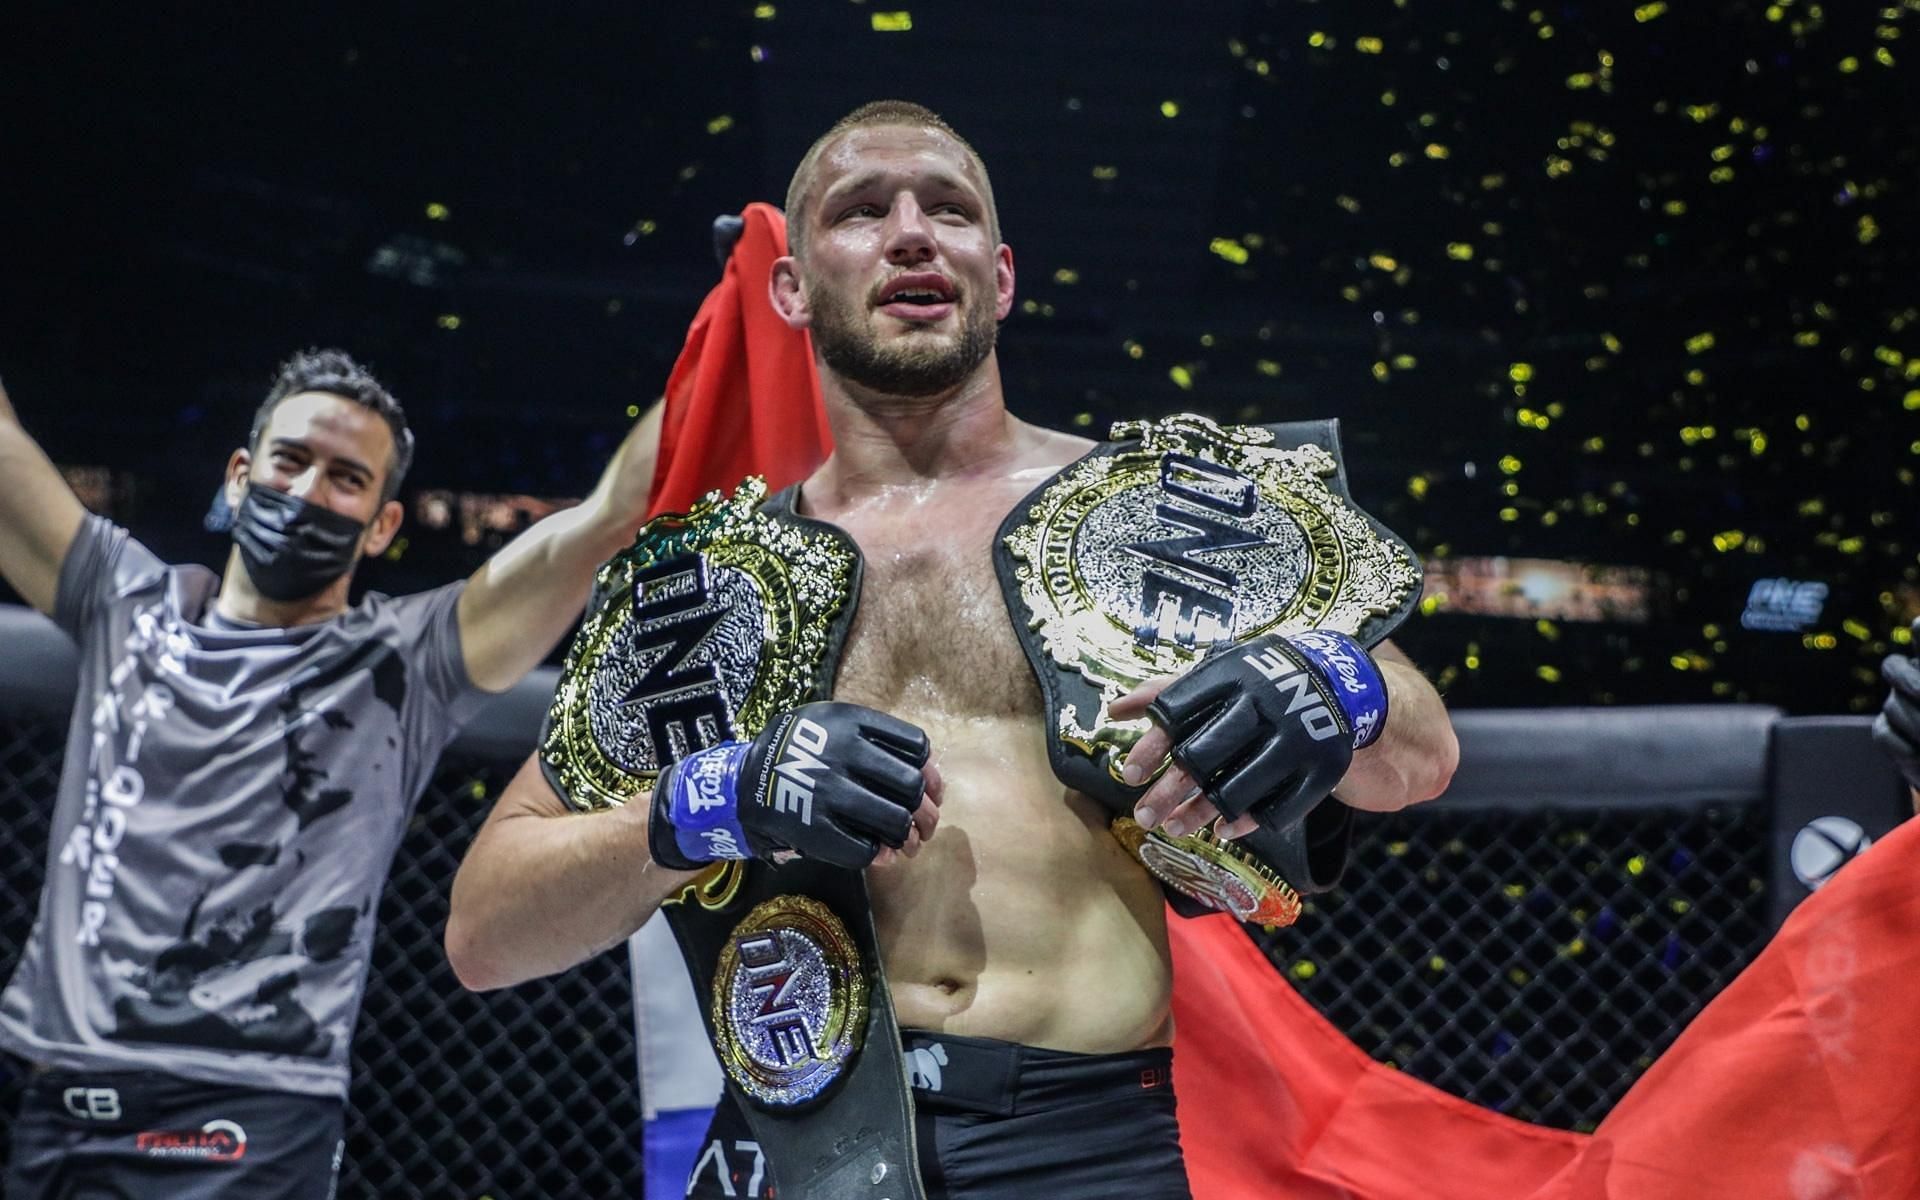 ONE Championship double champ Reinier de Ridder is one of the best MMA fighters active today. (Image courtesy of ONE Championship)